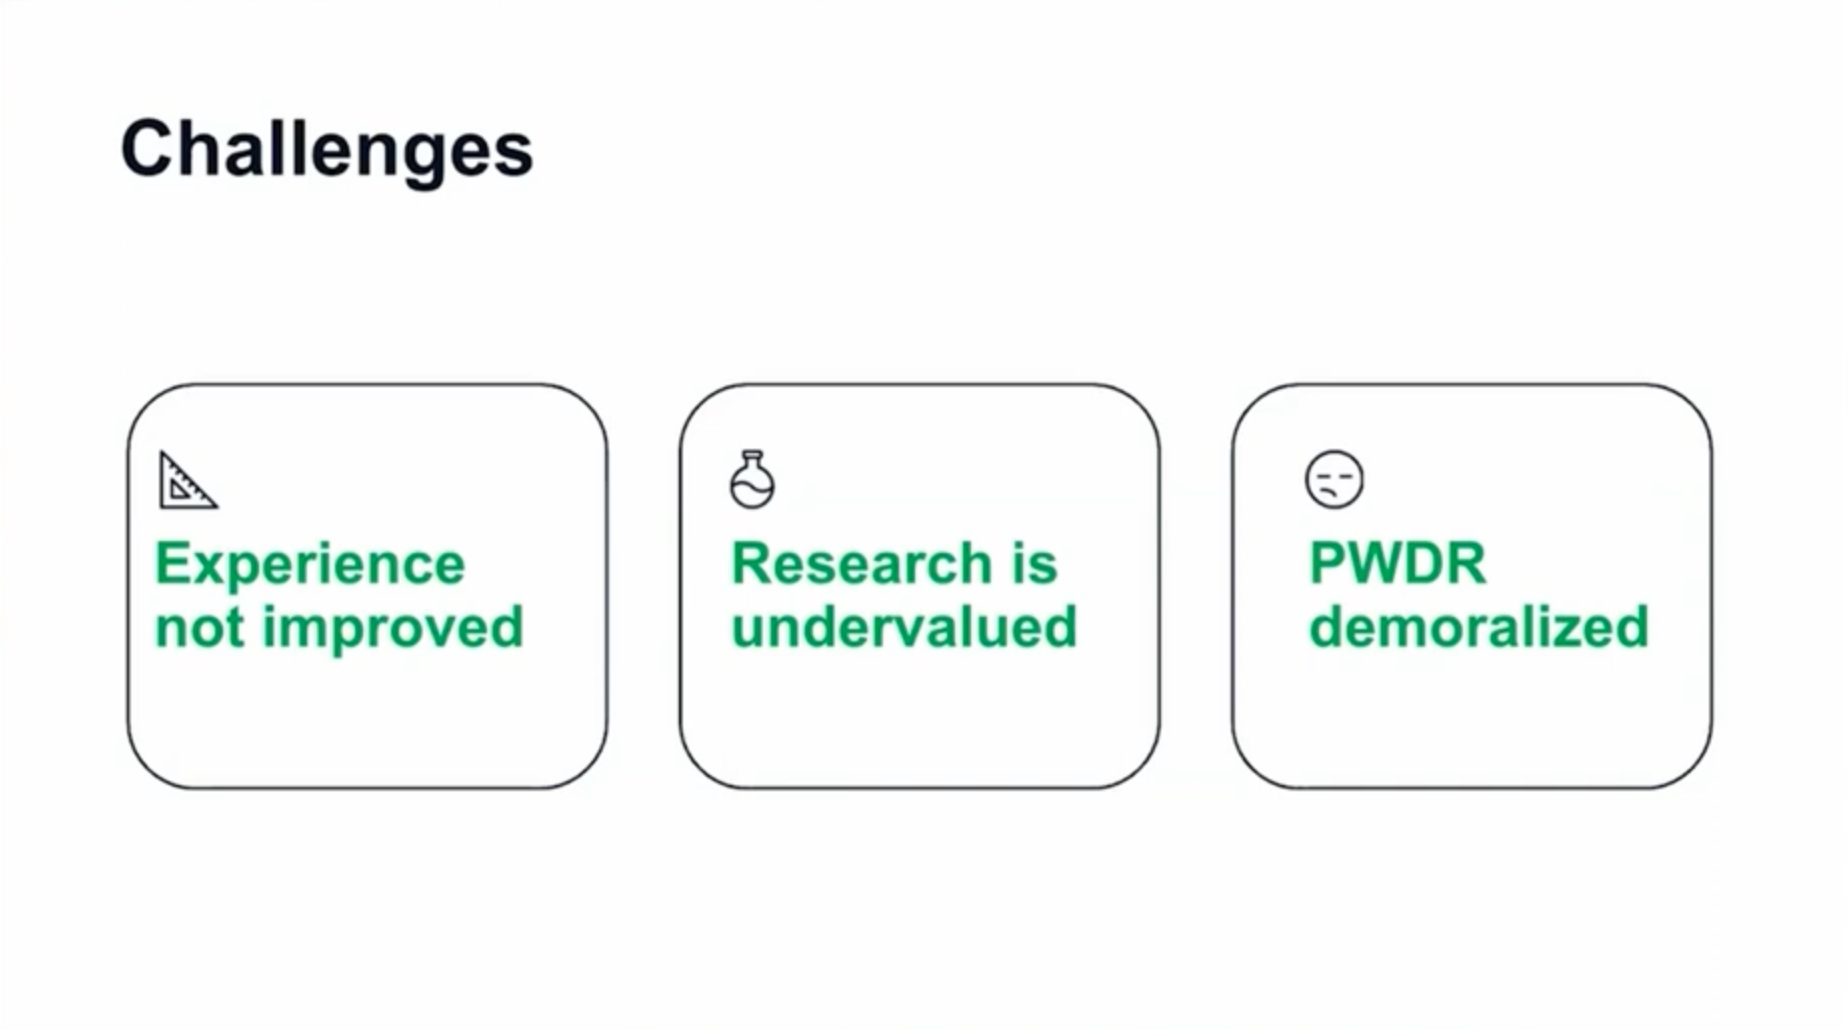 Three challenges. 1. Experience not improved. 2. Research is undervalued. 3. PWDR demoralized